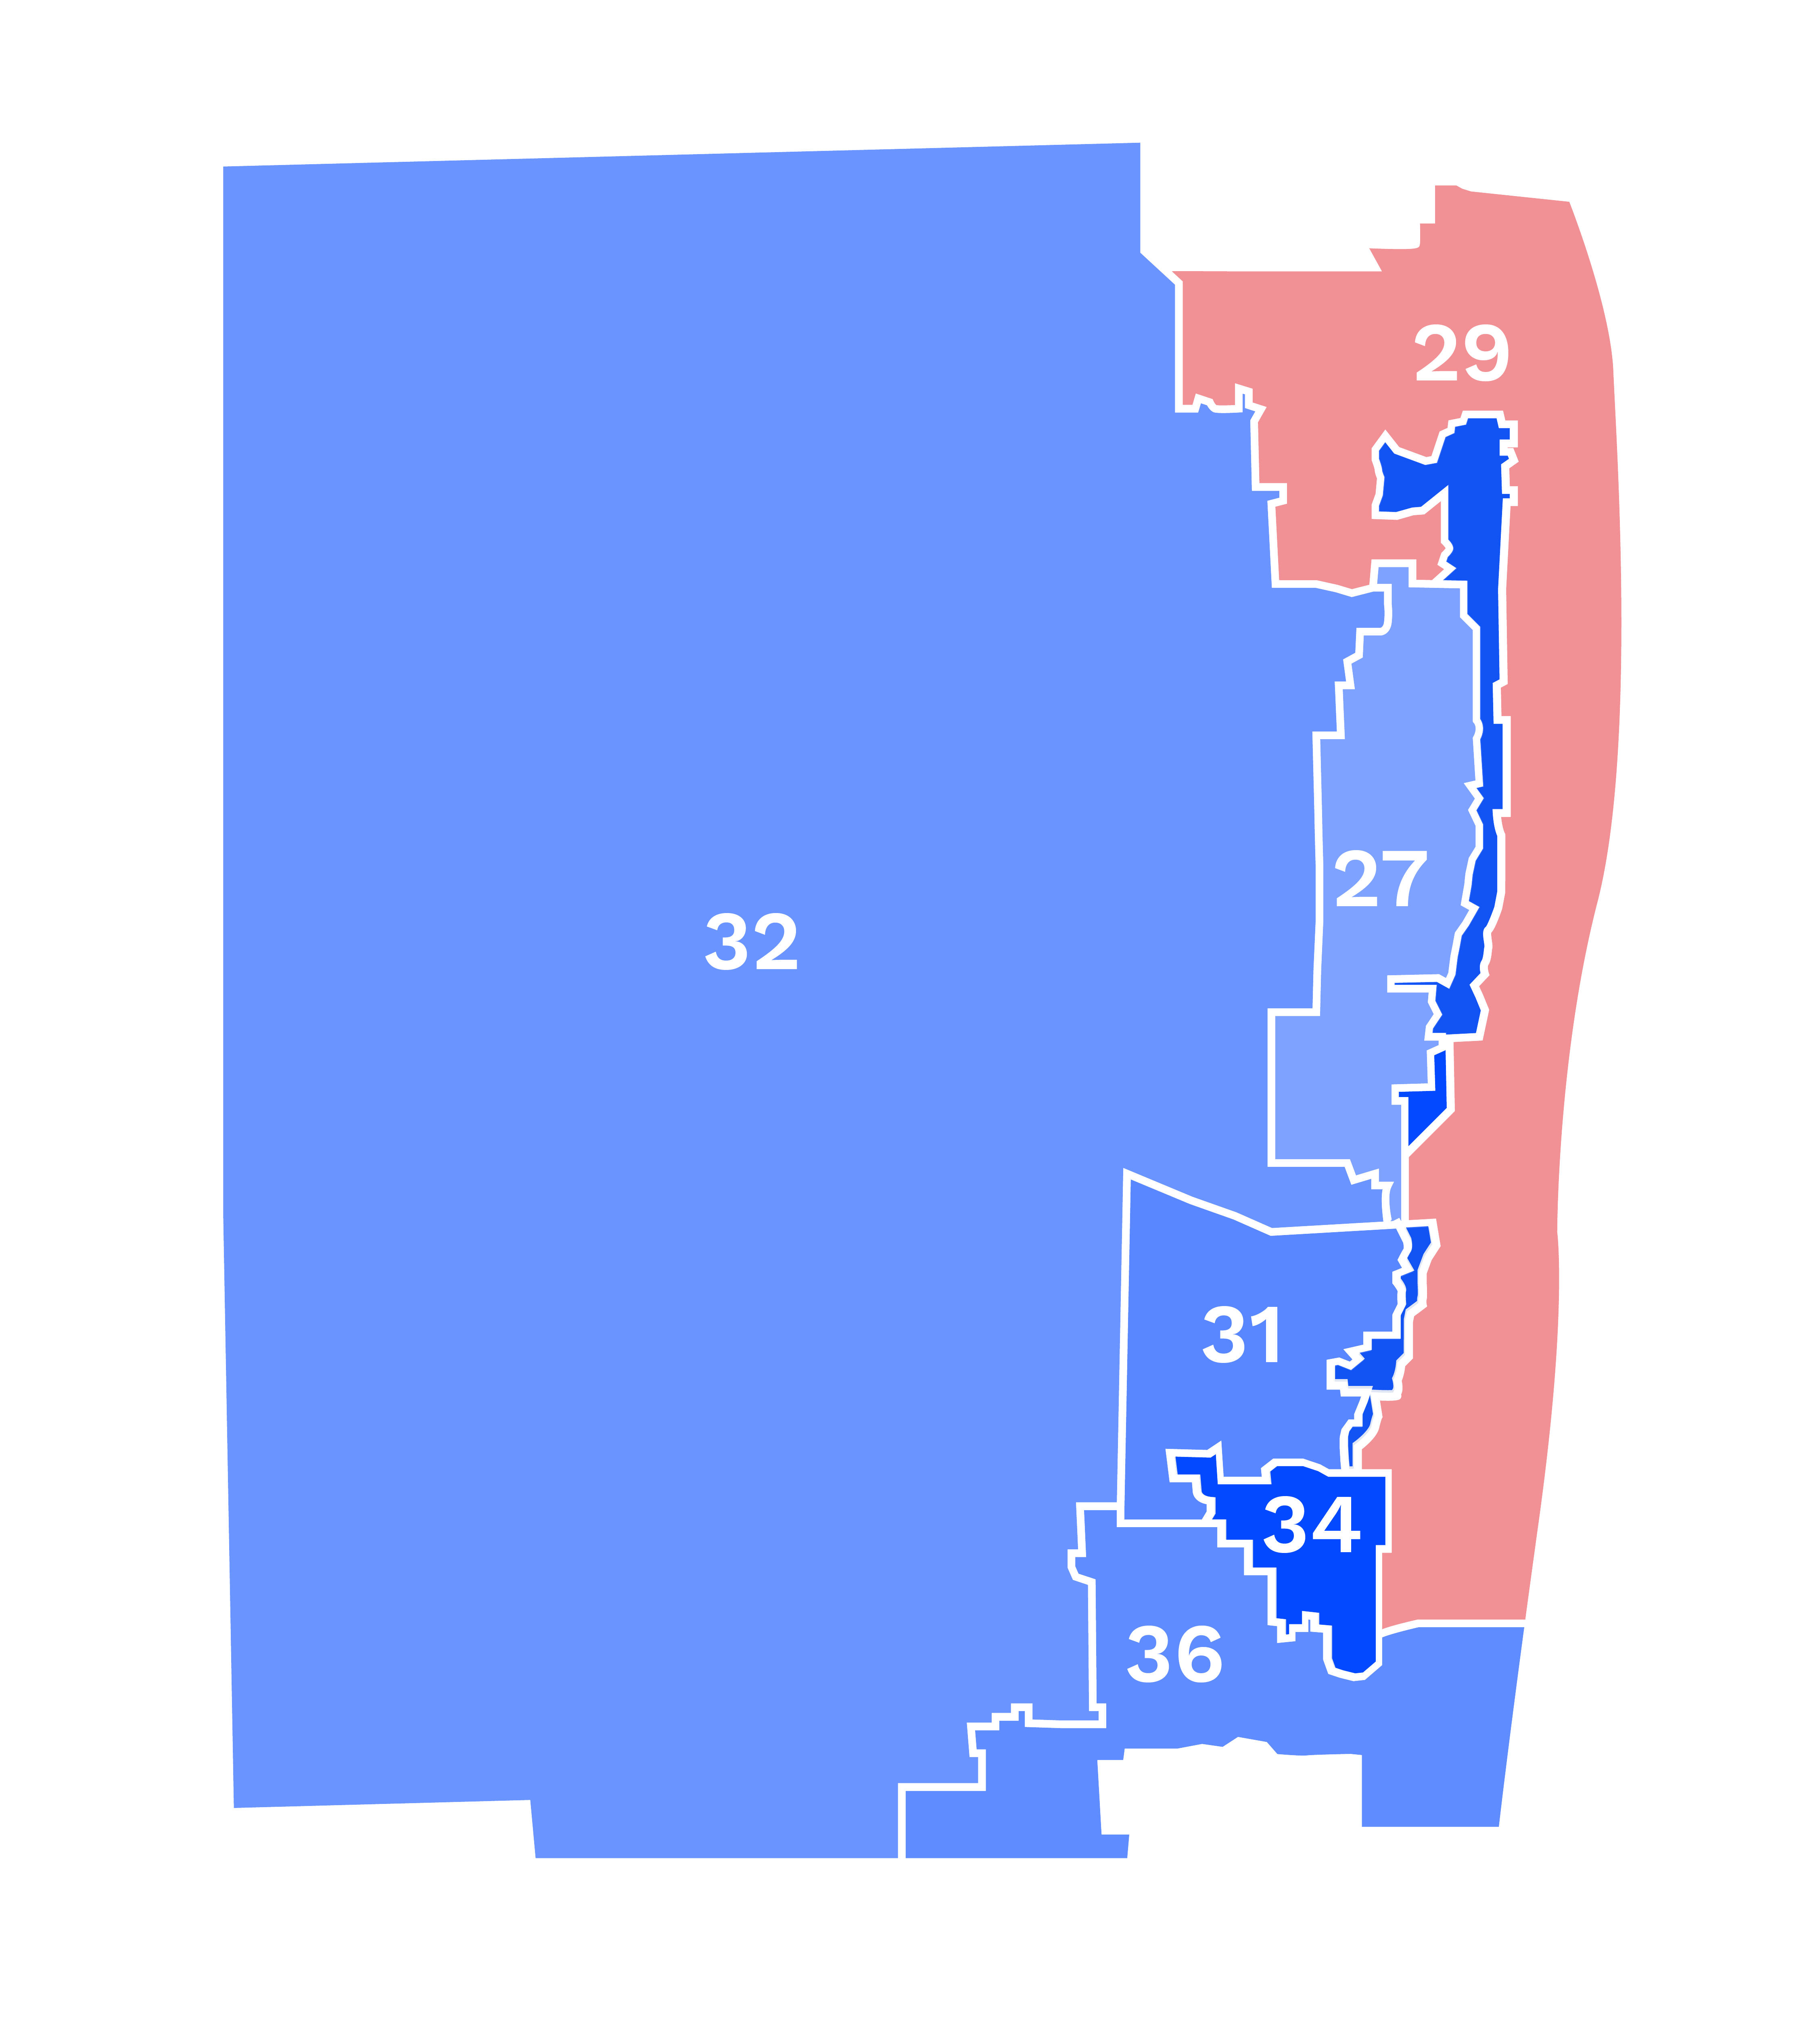 This is a map of four districts on Florida’s South Eastern coast, as drawn in the plan passed by the Legislature.  Two districts are narrow and elongated, stretching non-compactly along the coastline.  At its narrowest point, District 34 is less than a tenth of a mile wide, connected by Interstate highway 95.